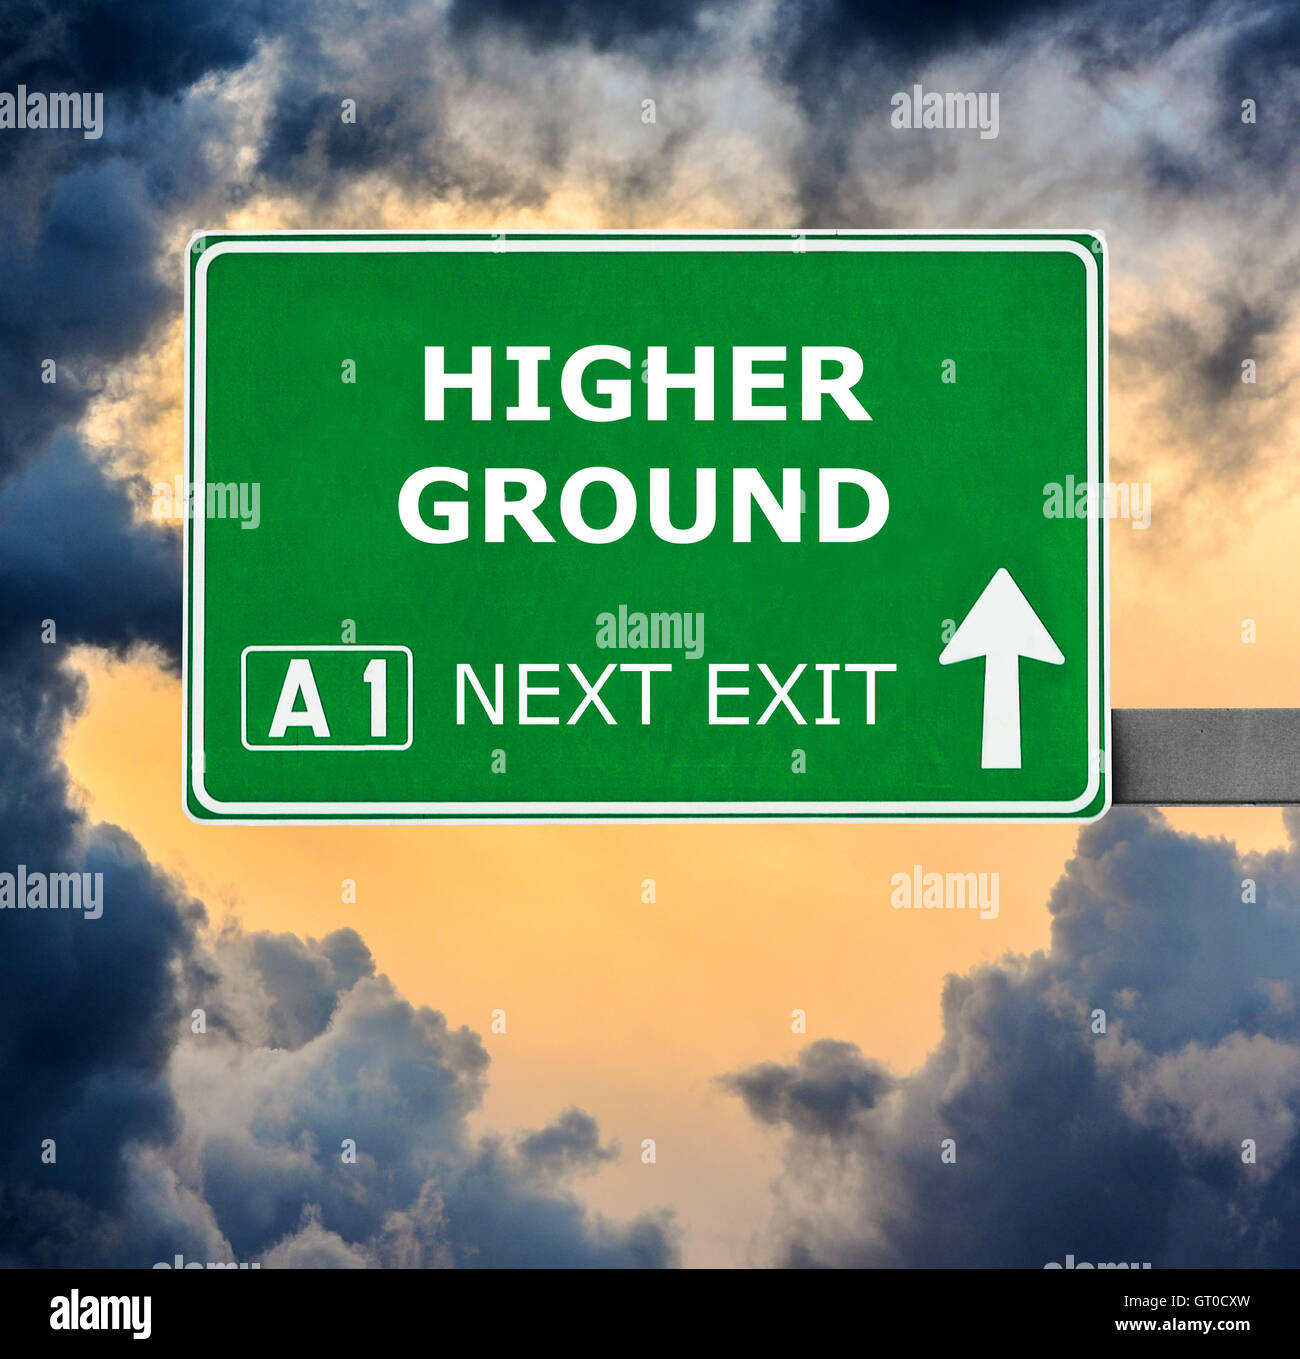 HIGHER GROUND road sign against clear blue sky Stock Photo